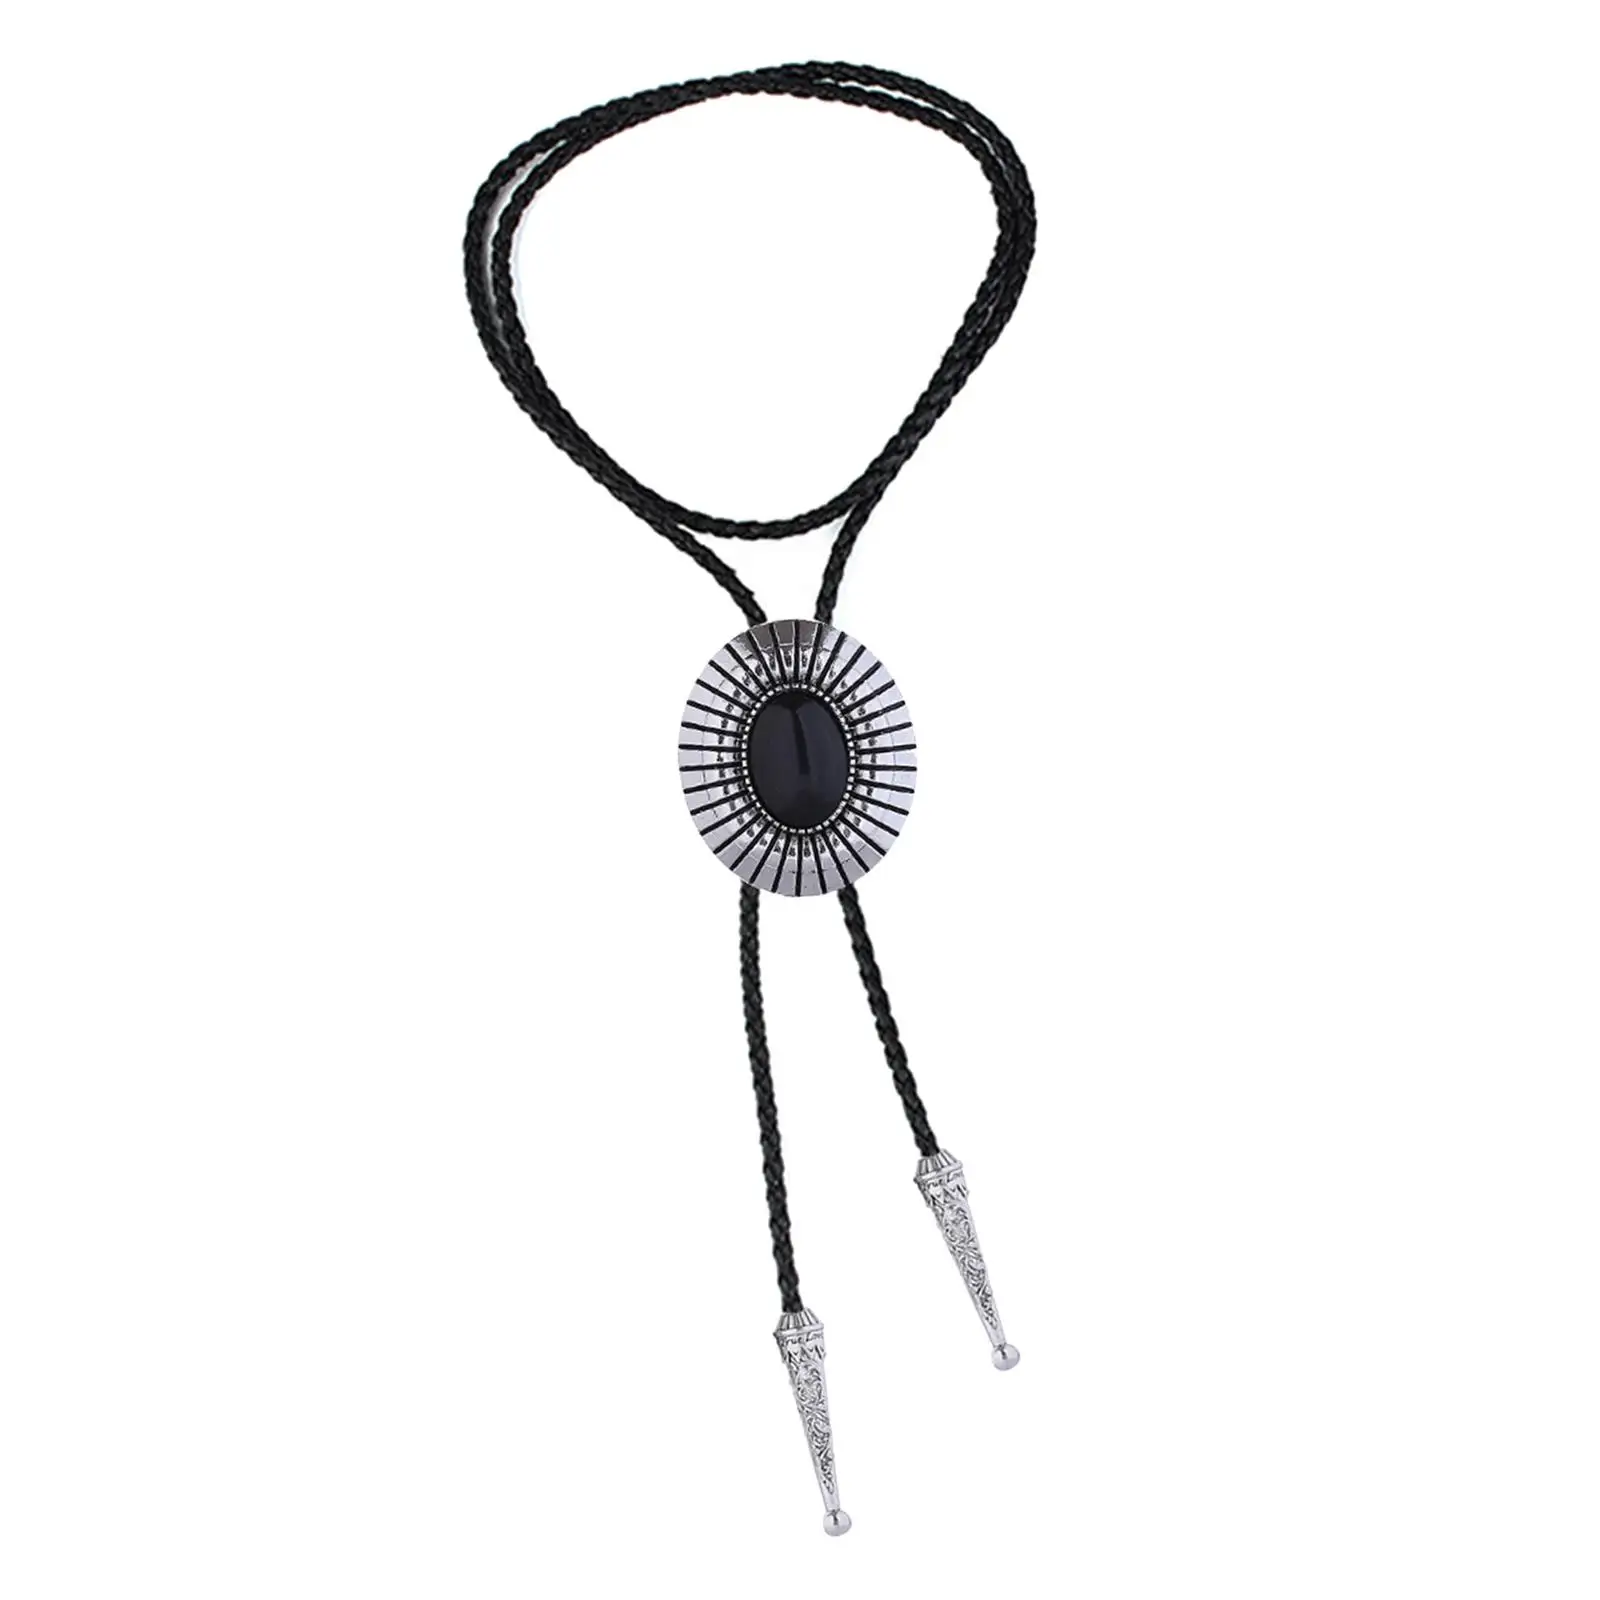 Bolo Tie Necktie Costume American PU Leather Necklace for Birthday Men